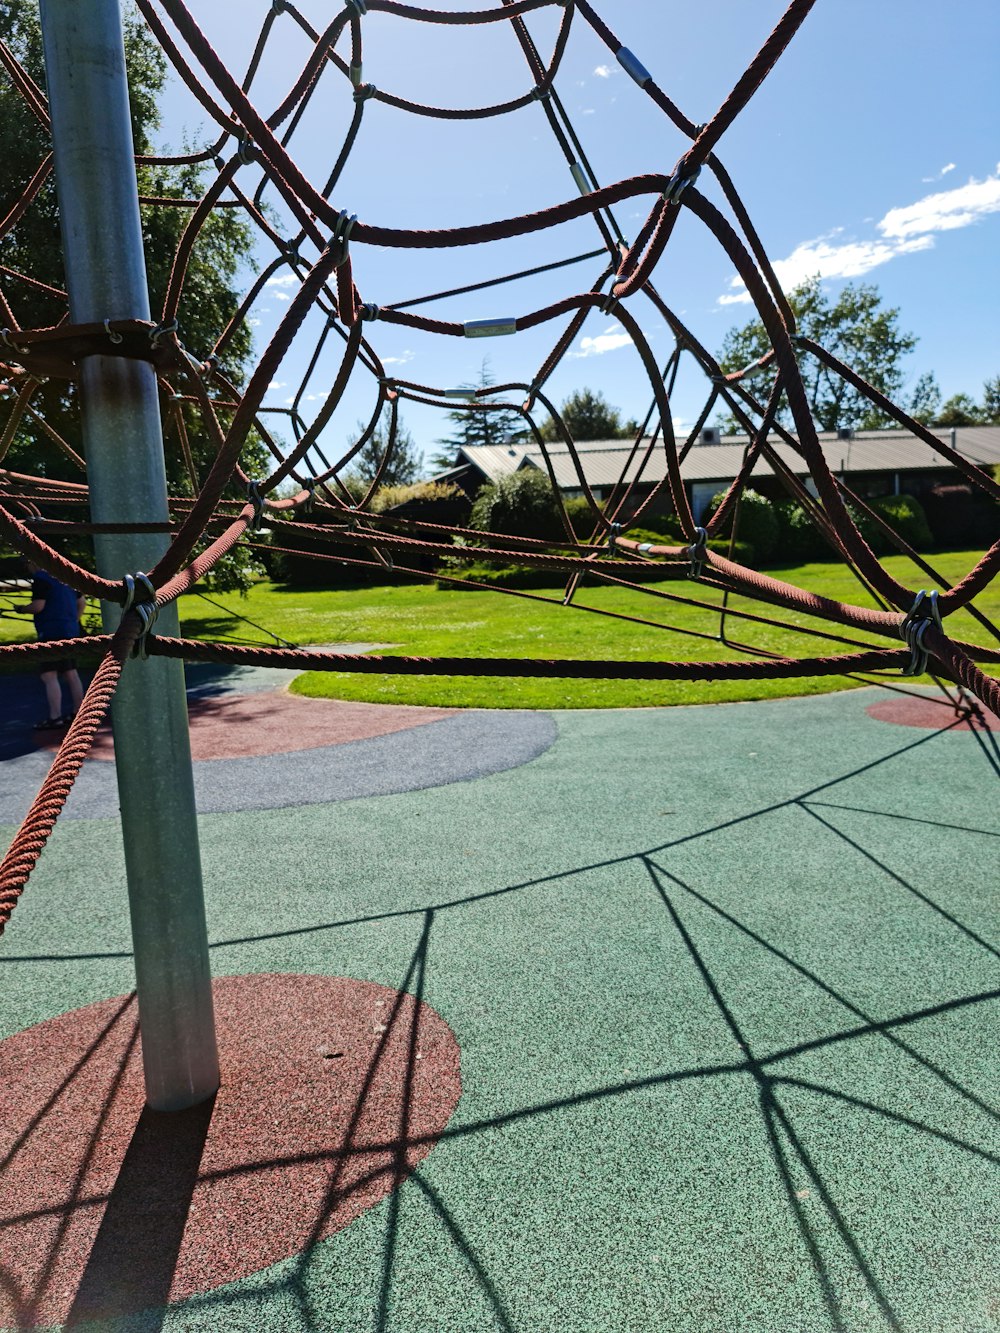 a close up of a playground net with grass in the background